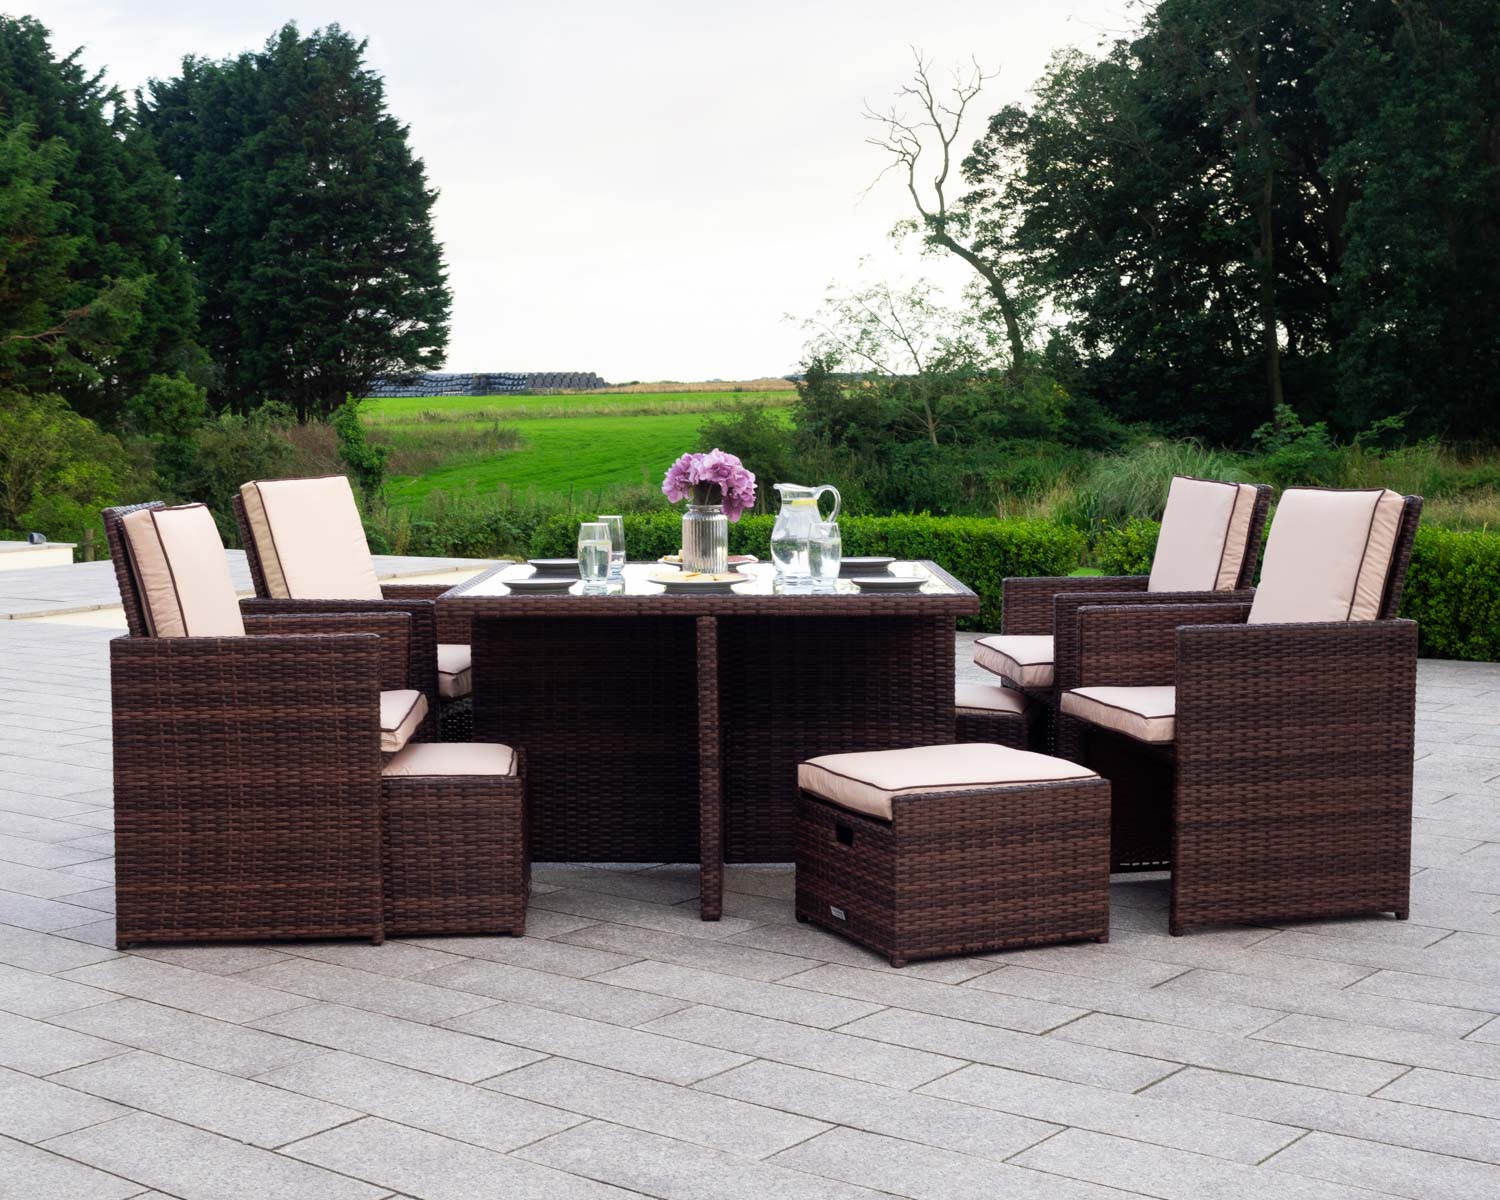 4 Seat Rattan Garden Cube Set in Brown with 4 Footstools - Barcelona